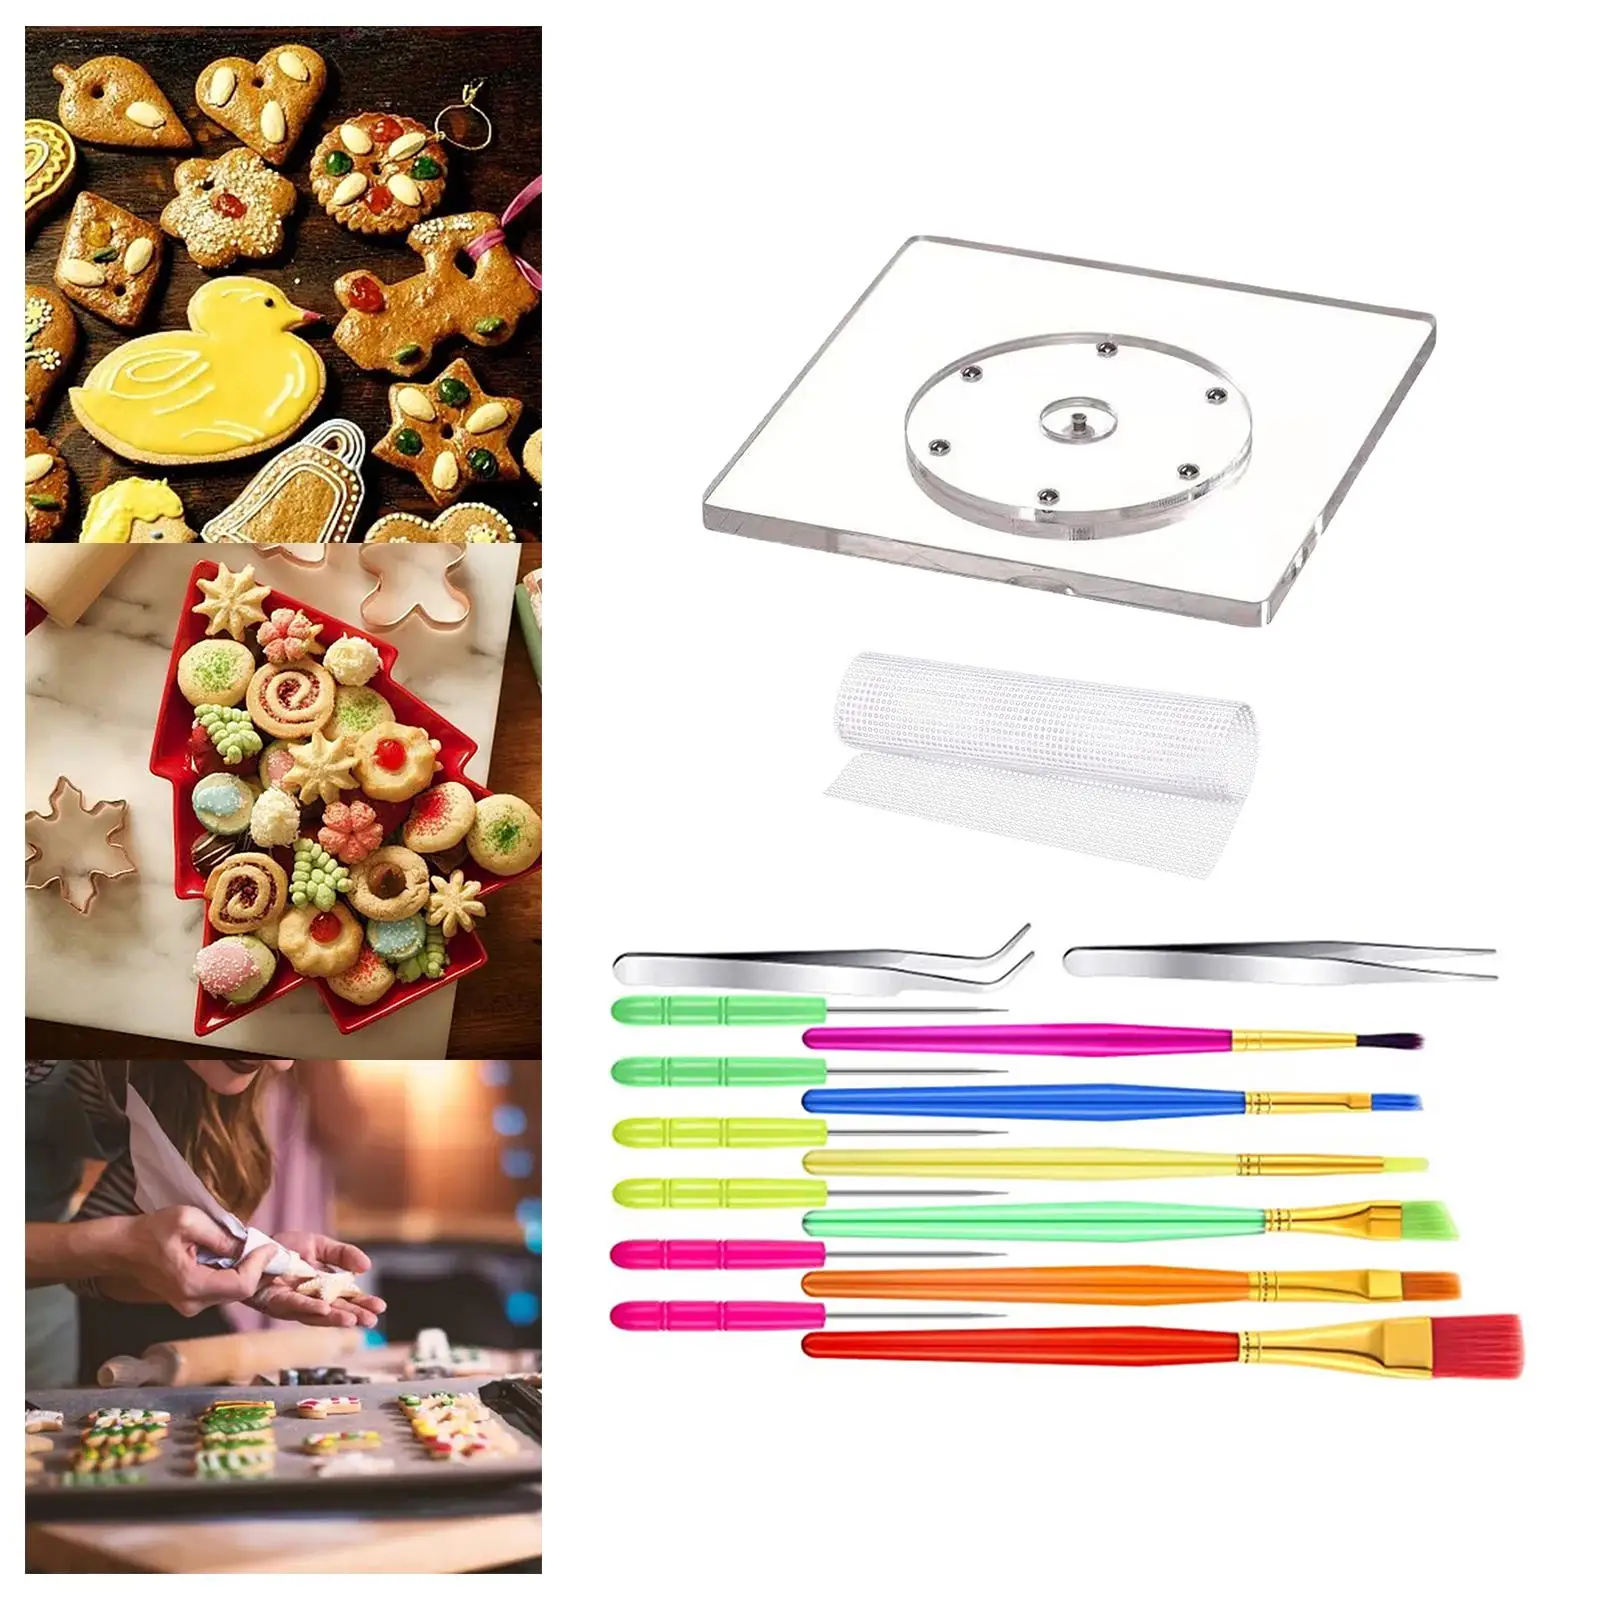 16 Pieces Cookie Decoration Set cake Decorating for Easter Wedding Christmas